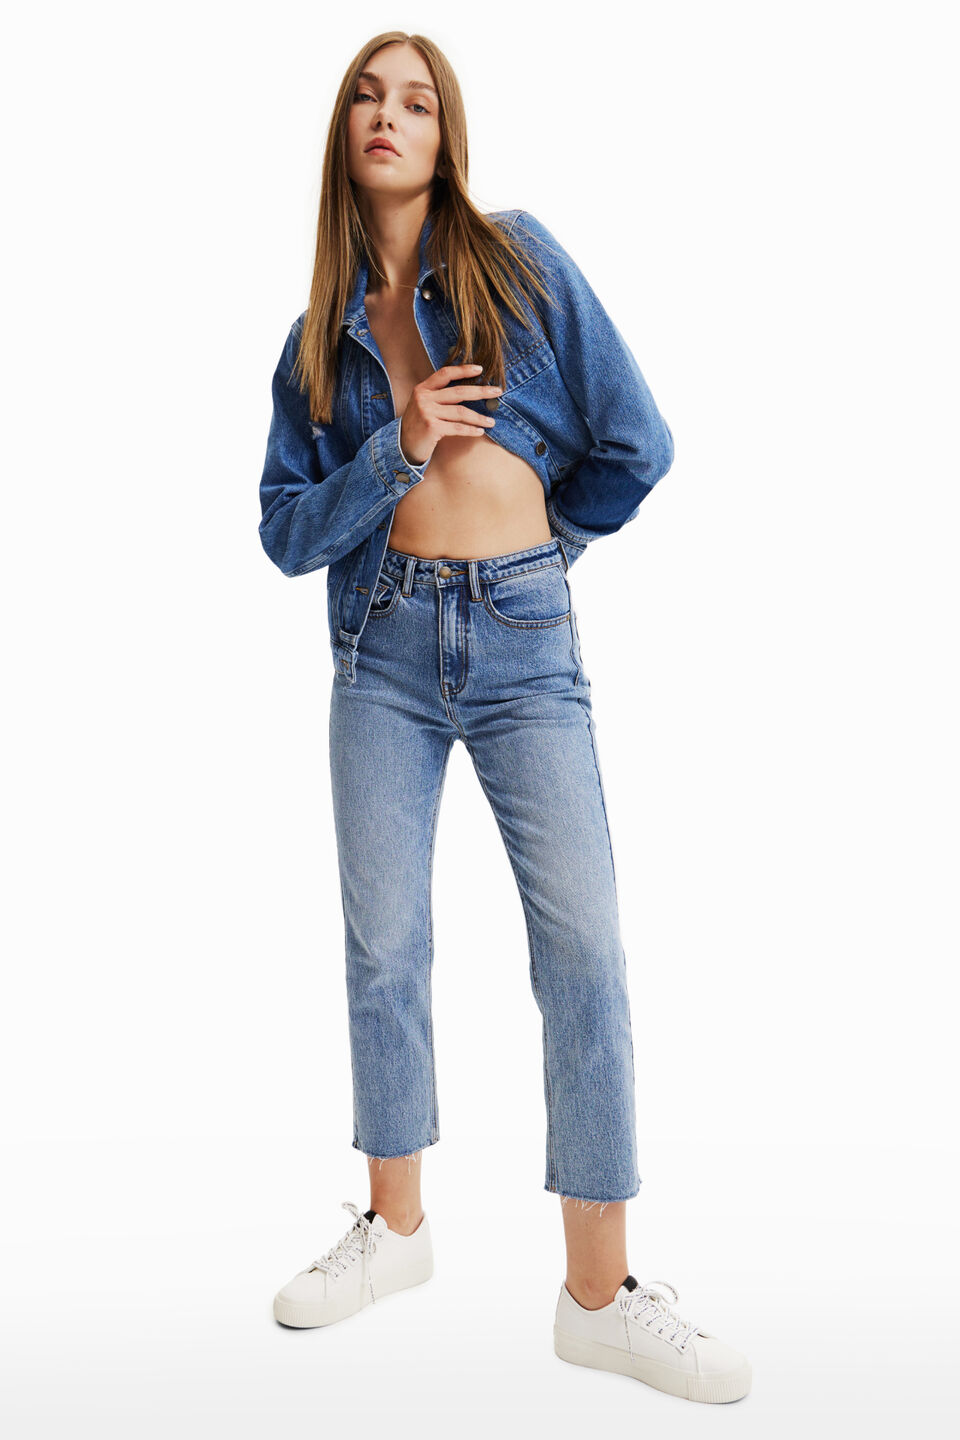 Fern superstition Accountant Wide Leg Jeans for women | Desigual